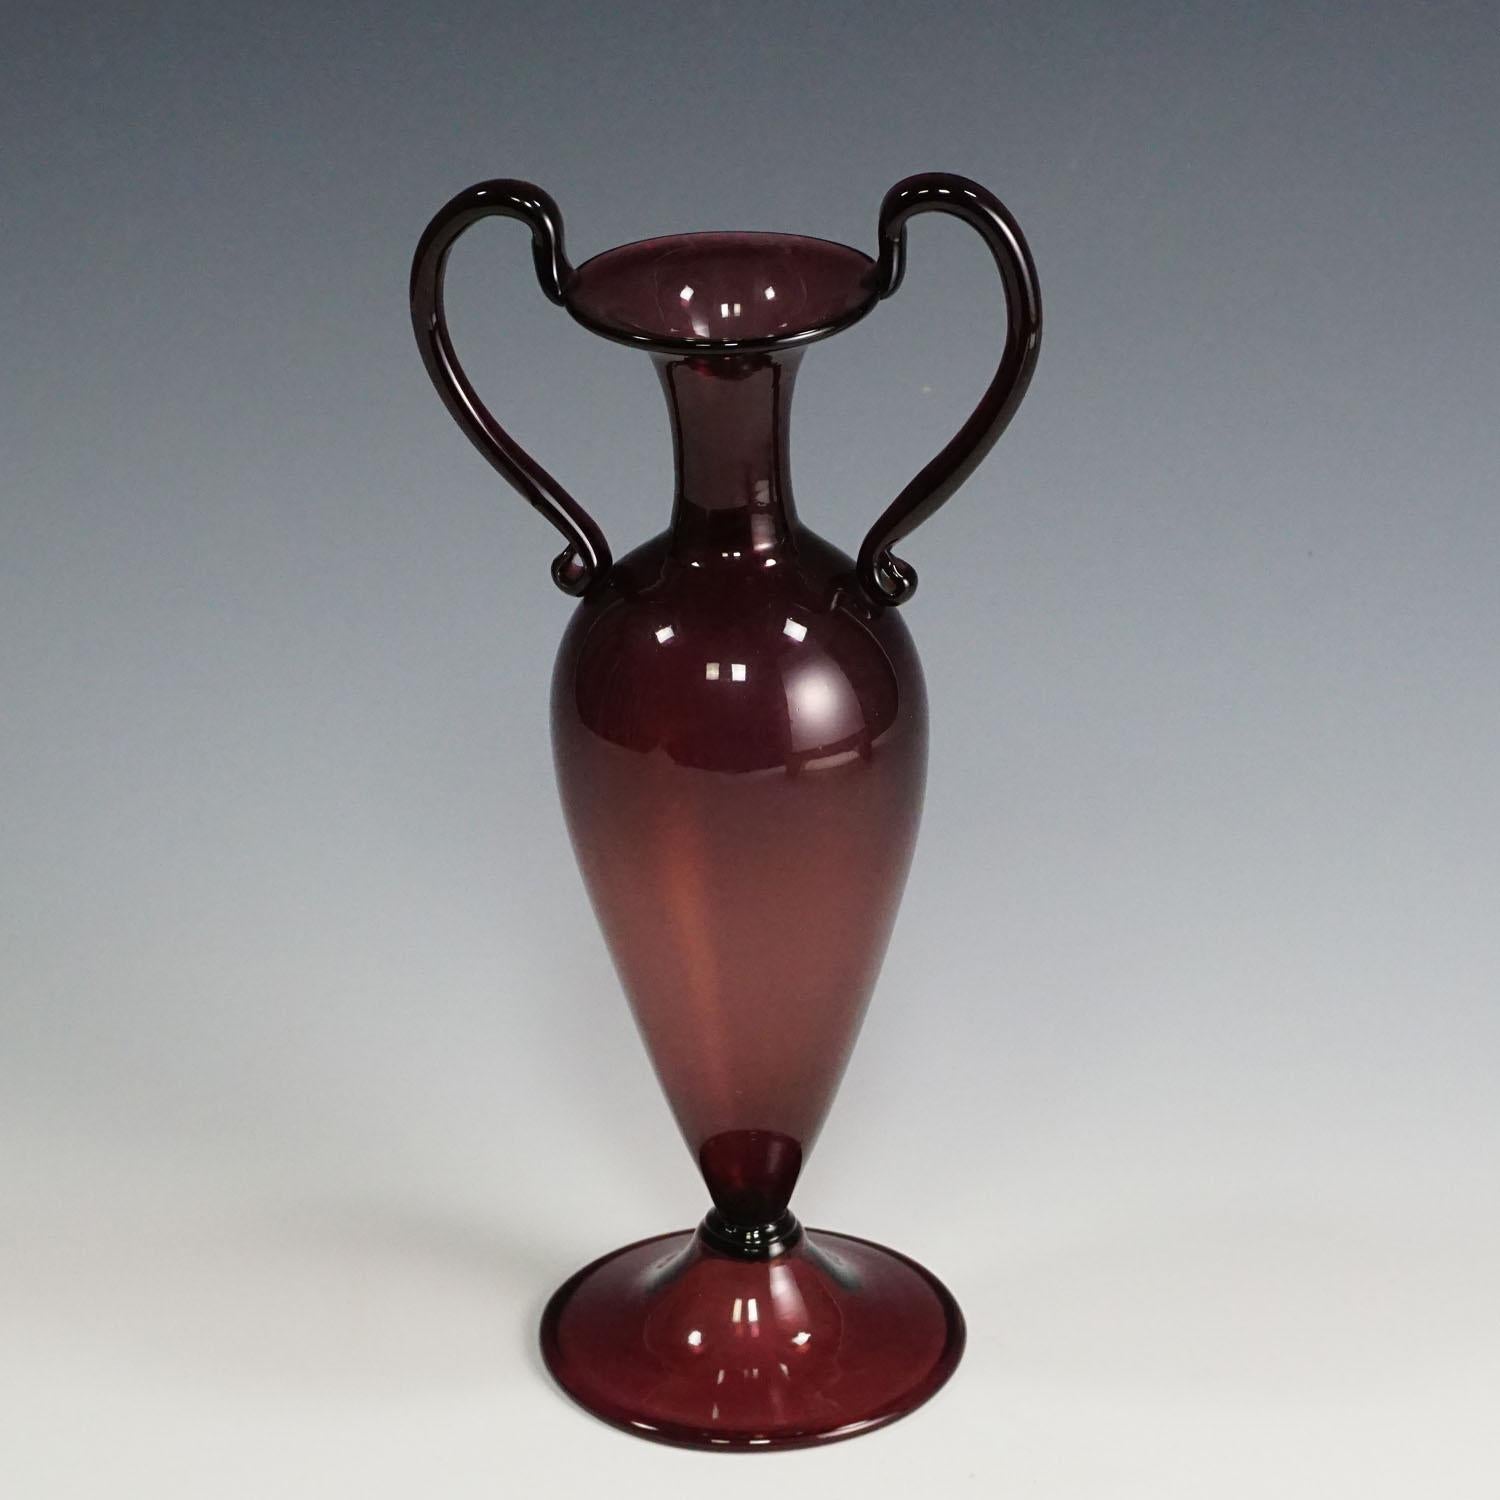 A 'Vetro Soffiato' glass vase in dark amethyst glass with two handles, Murano Venice ca. 1950.
Measures: Width 5.12